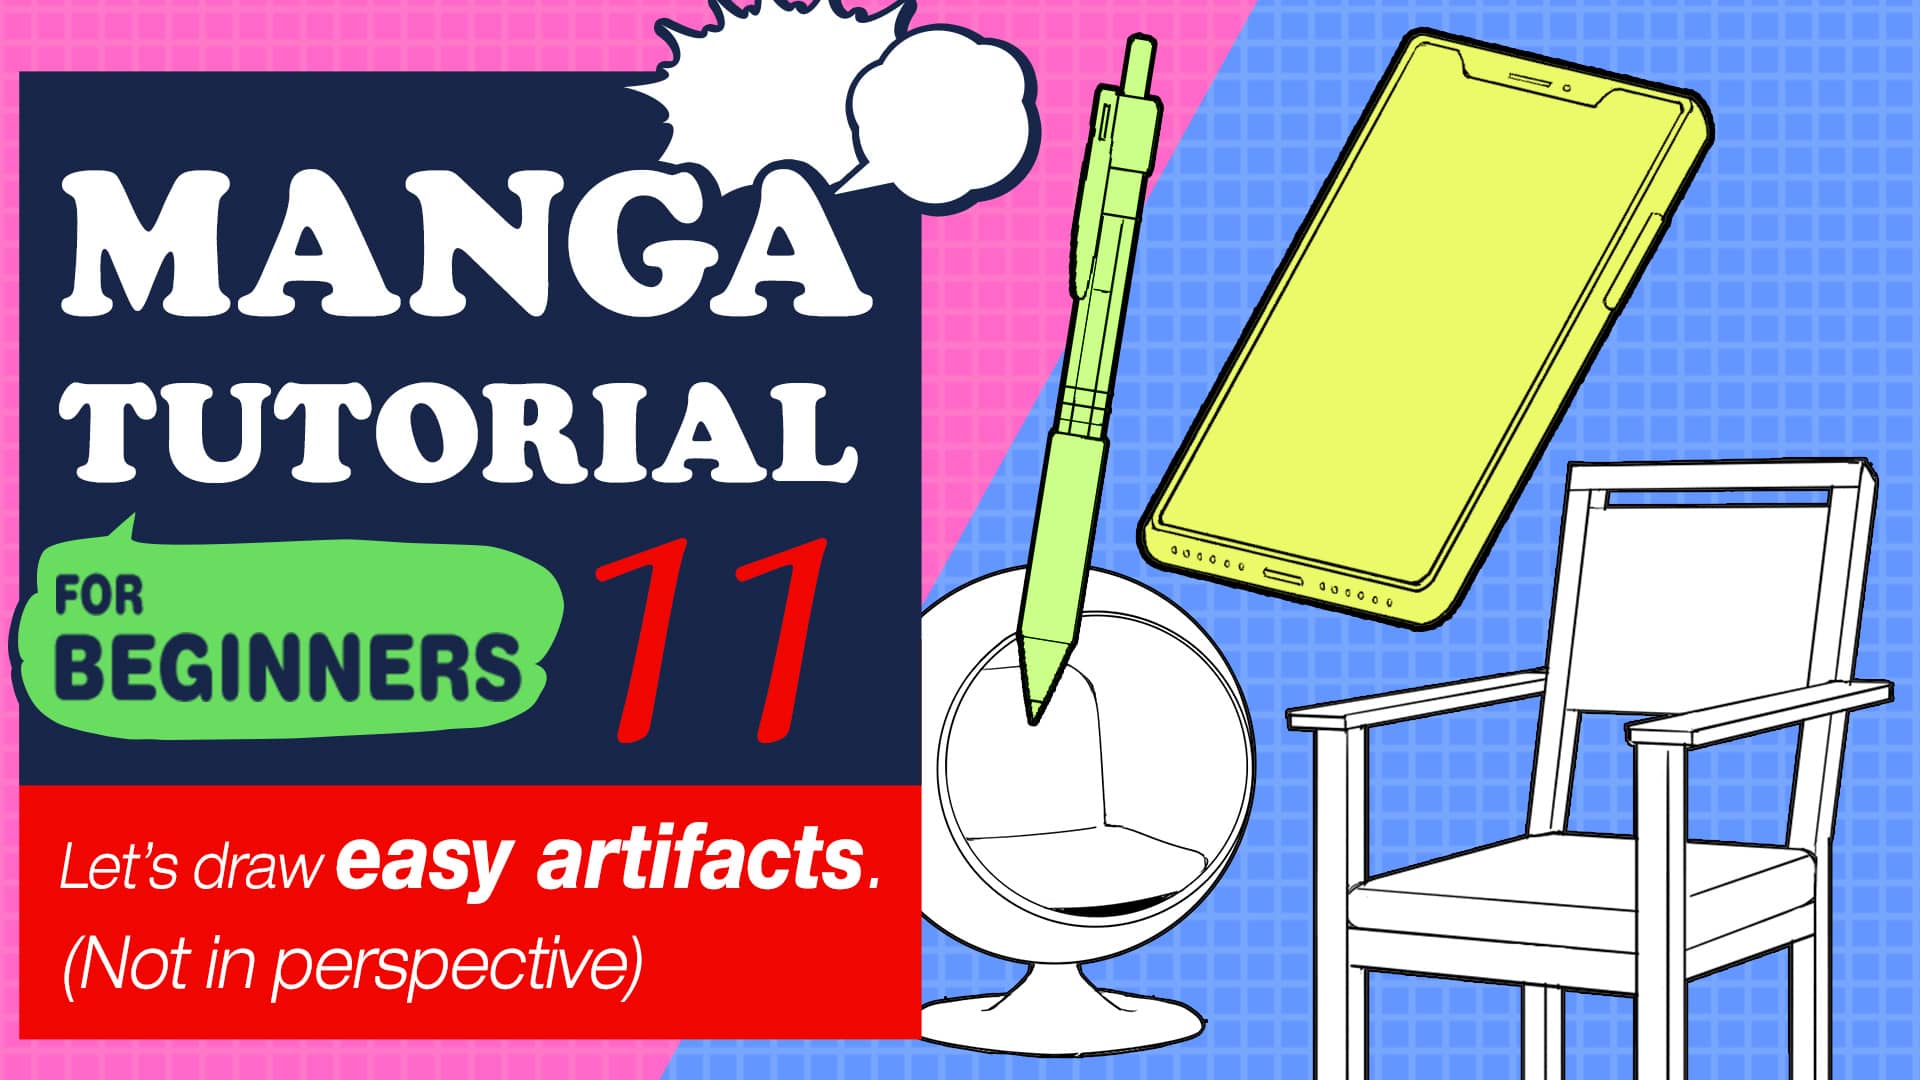 Manga Tutorial for Beginners 07 Considerations when setting up the canvas.